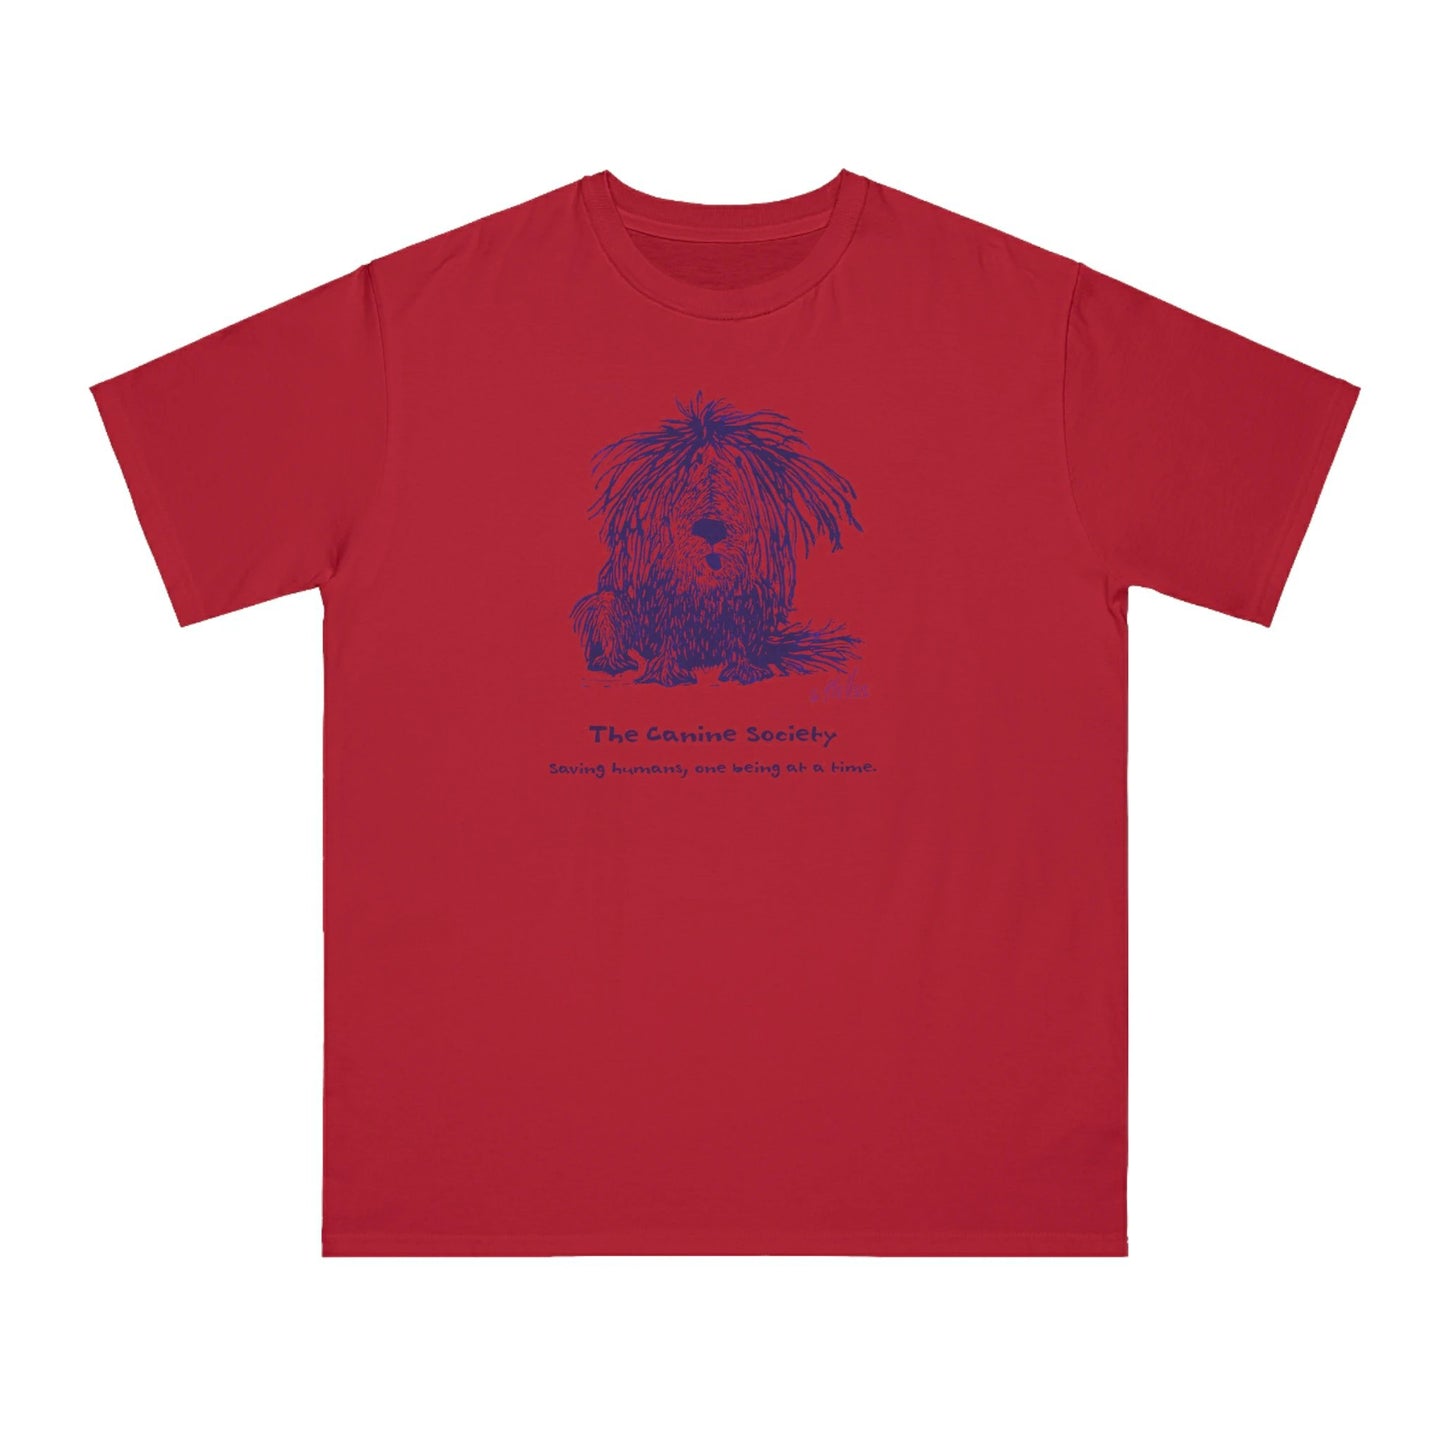  A Shaggy Dog sits on a red pepper color unisex men's t-shirt. Text below reads: 'Canine Society Saving Humans One Being at a Time.'